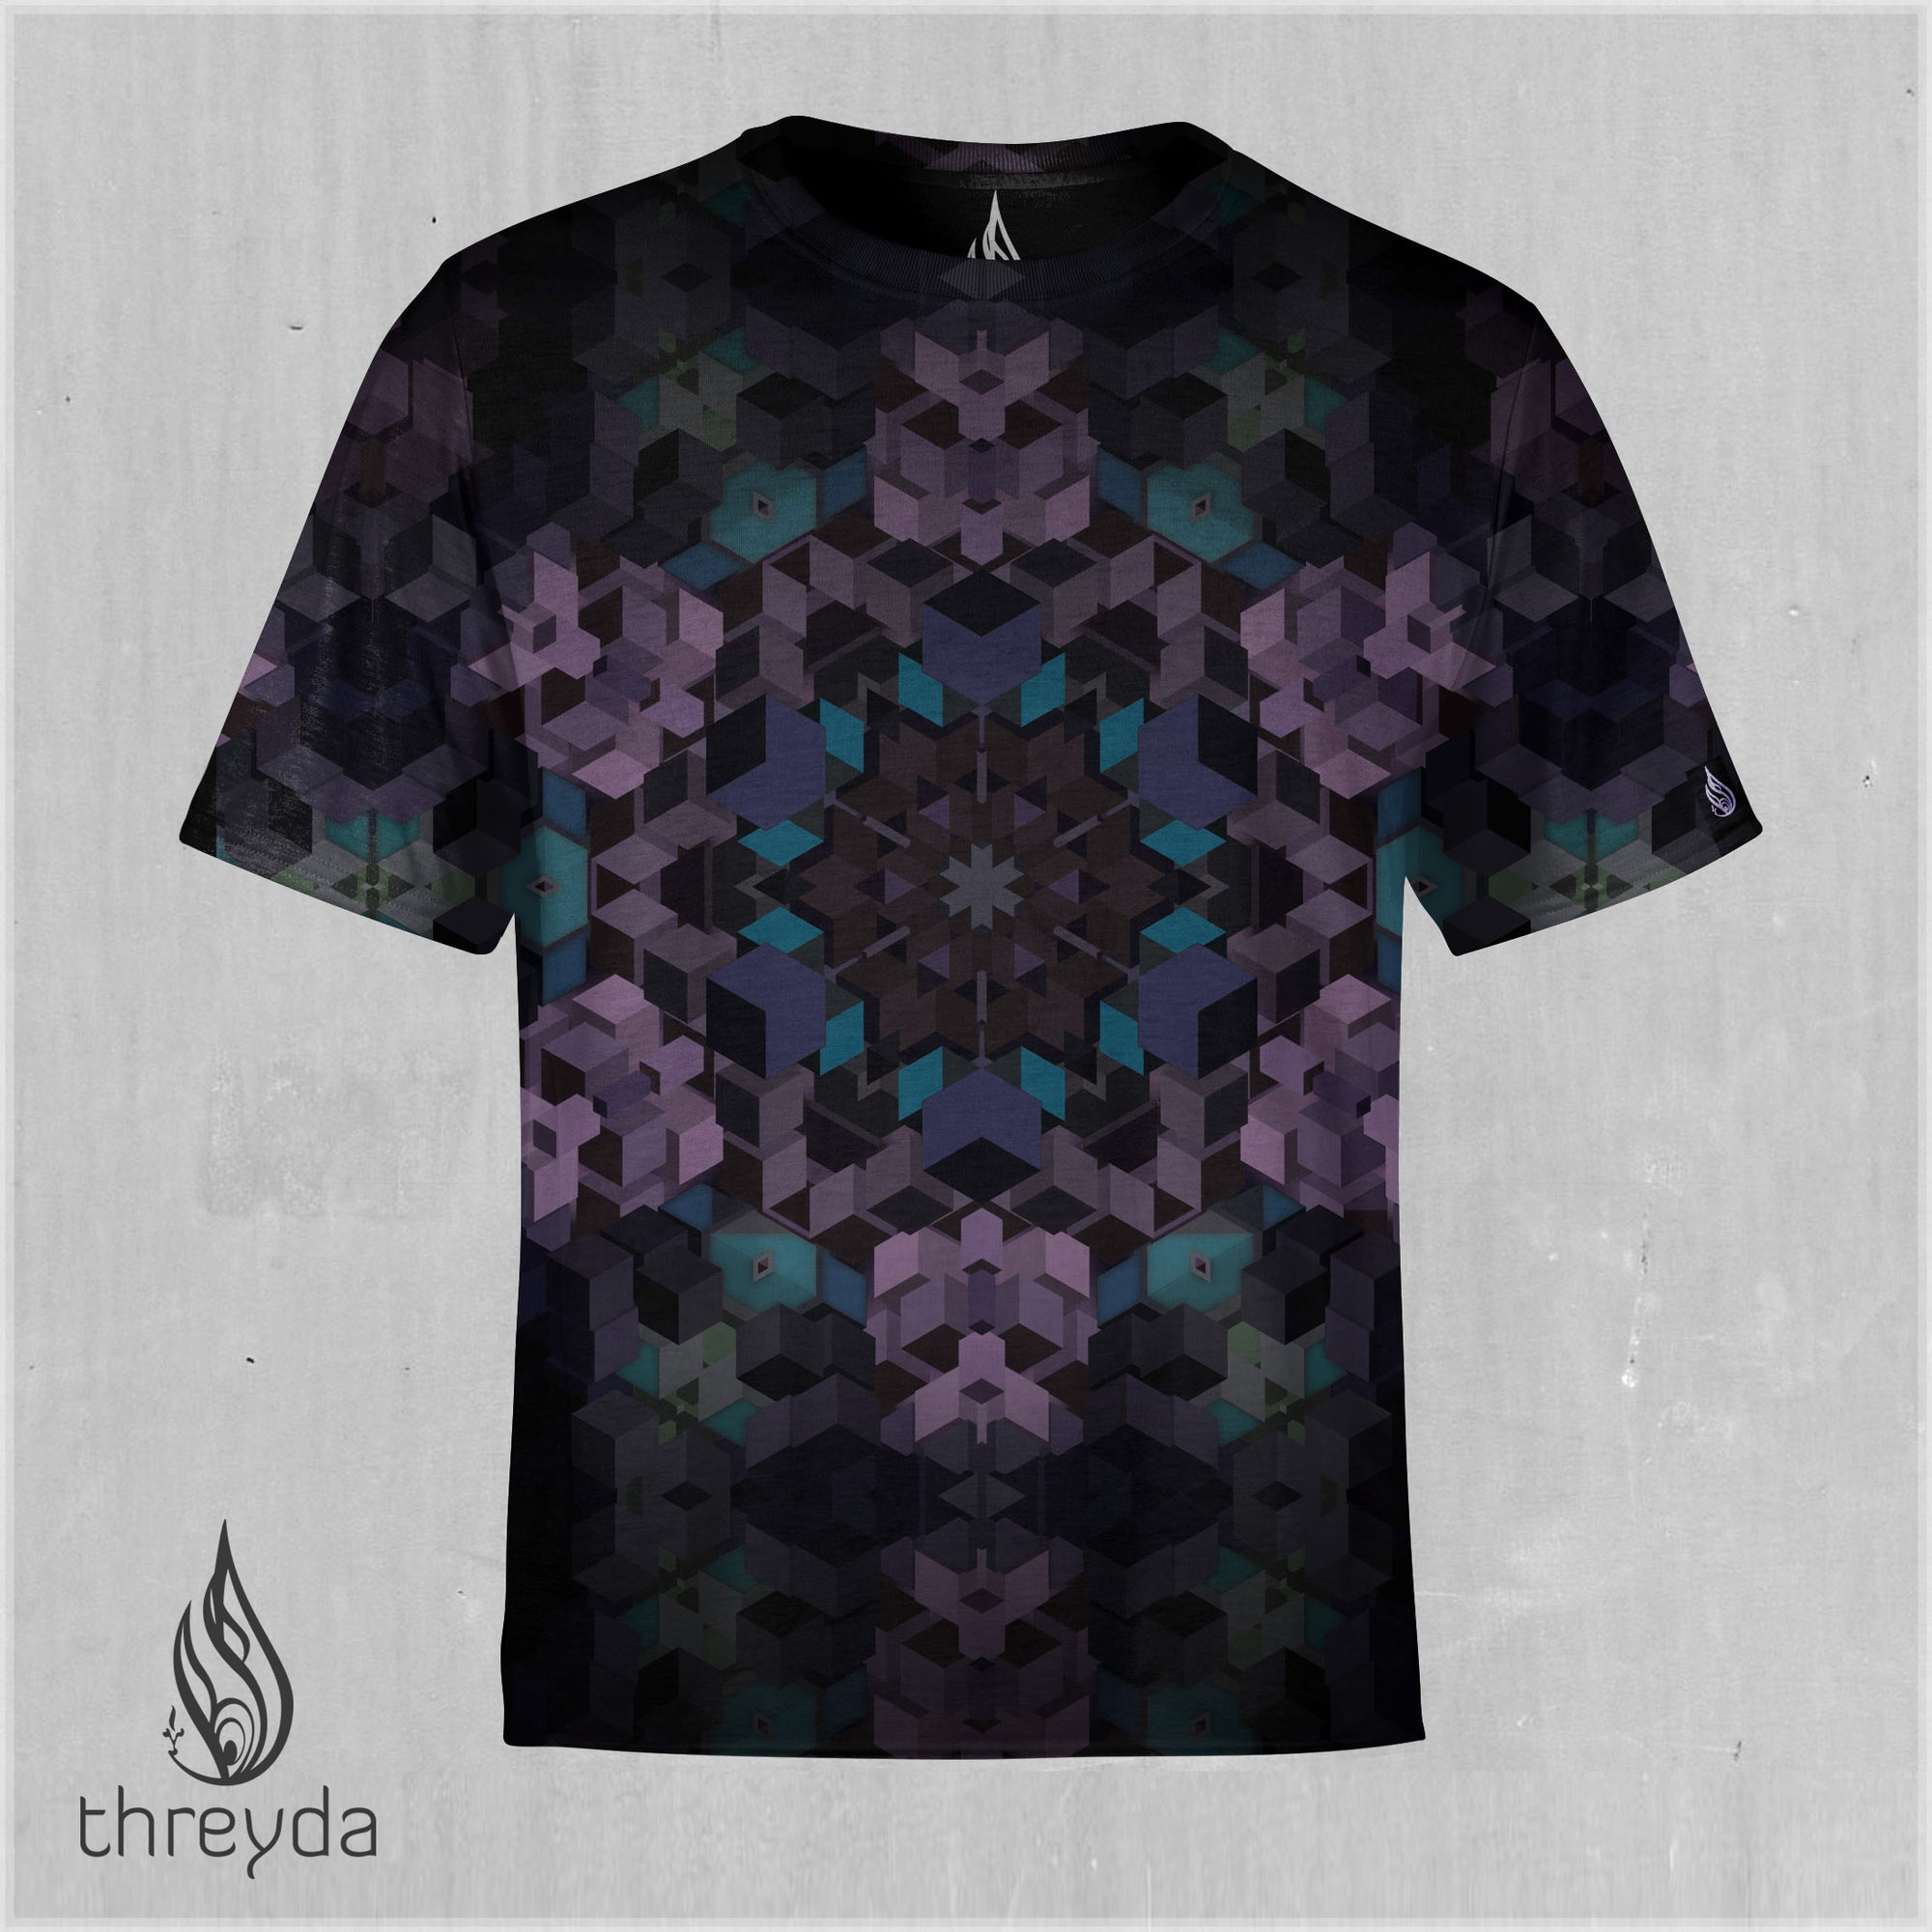 Catalyst Sublimation Tee by Threyda - Exclusive Presale SHIPS APRIL